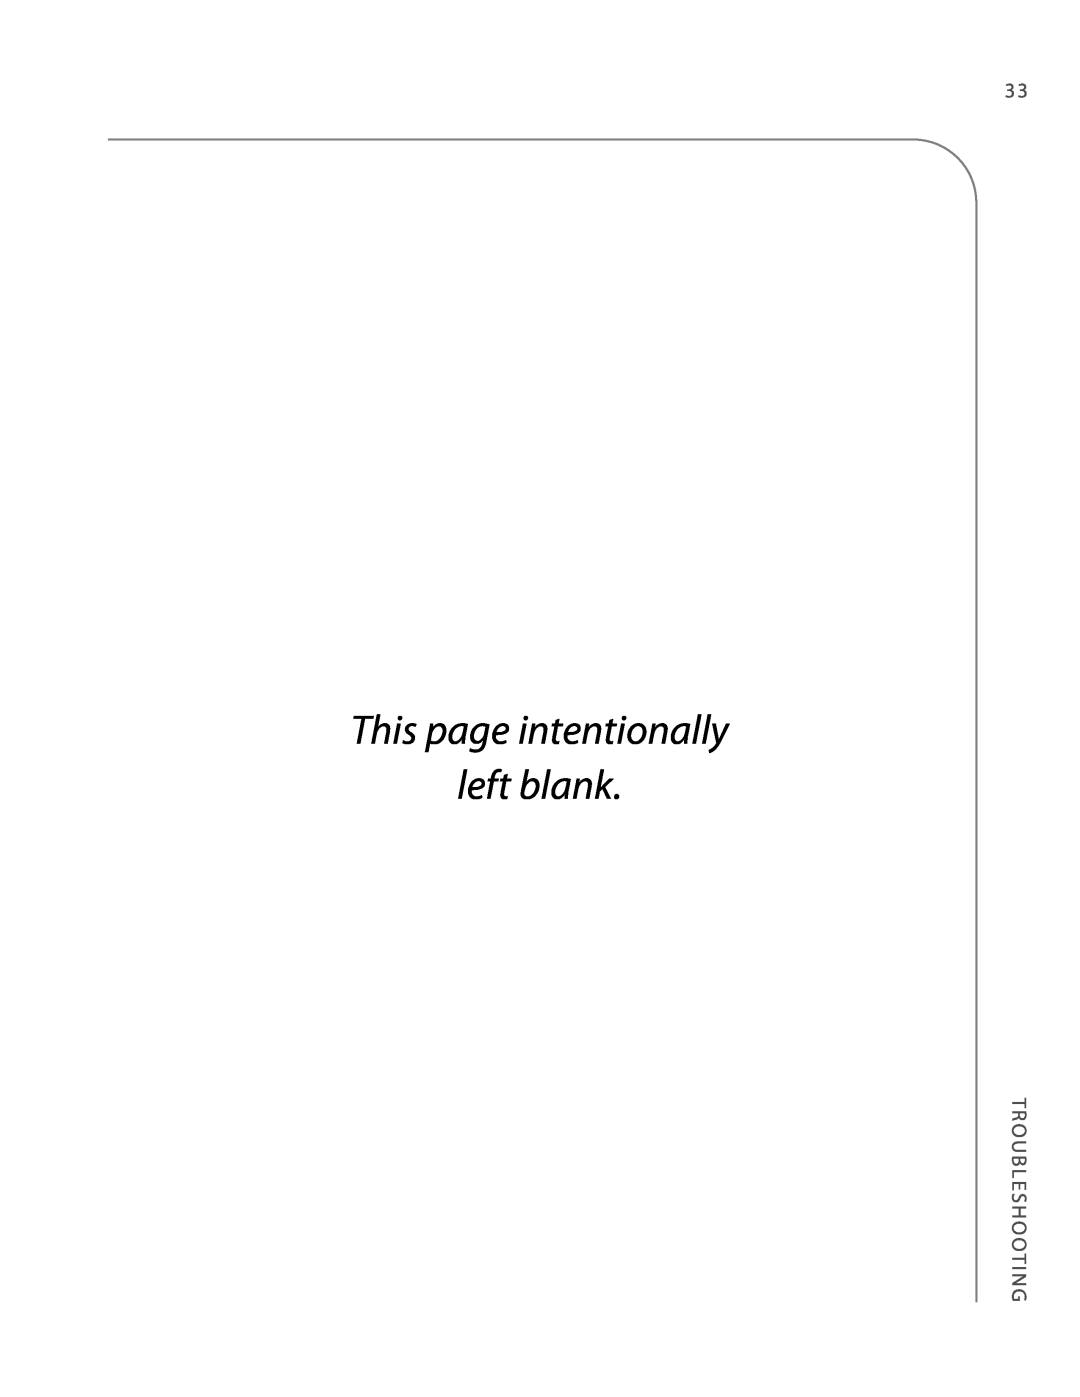 Turbo Chef Technologies 3240 manual This page intentionally left blank, T Ro U B L E S H O Ot I N G 